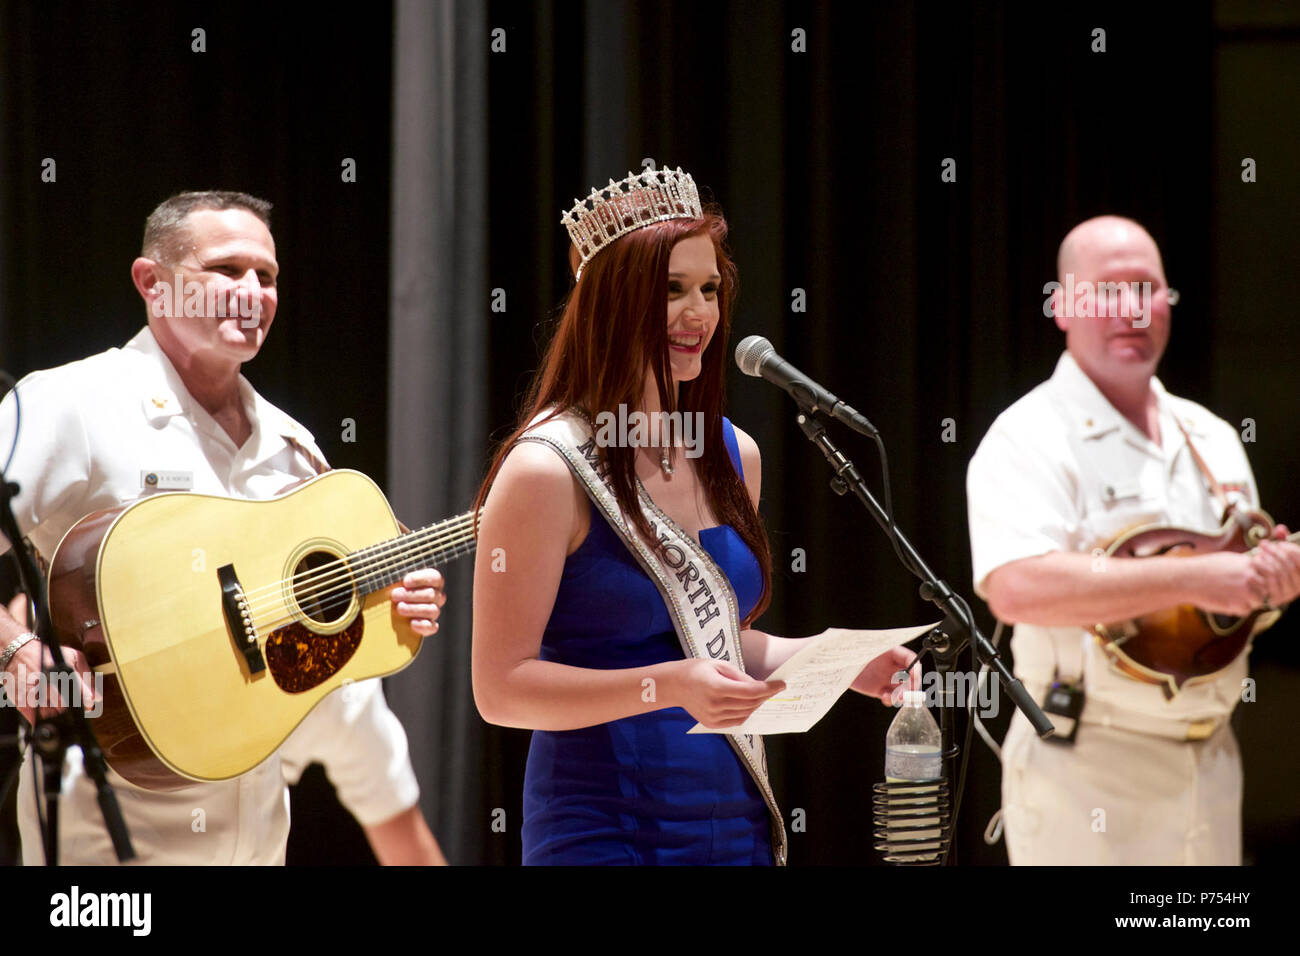 BISMARCK, N.D. (Sept. 6, 2015) Miss North Dakota USA, Molly Ketterling, introduces the U.S. Navy Band Country Current at the Belle Mehus Auditorium in Bismarck, N.D. The Navy Band's tour featured 14 performances in six states, reaching out to communities that don't normally see the Navy at work. Stock Photo